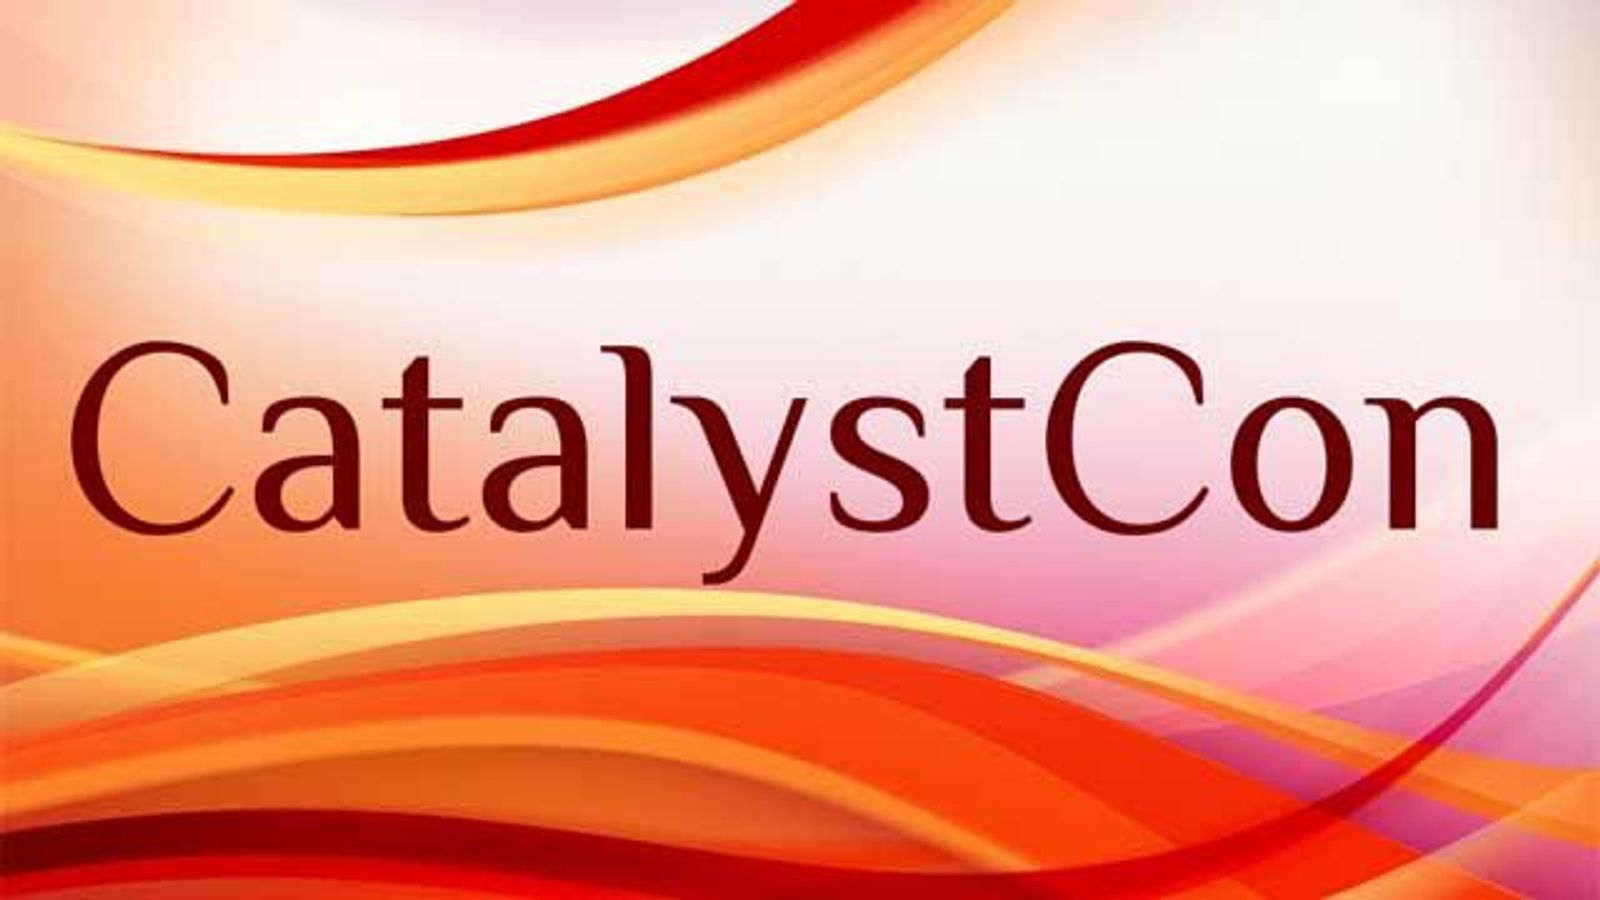 Sessions, Speakers Announced for CatalystCon West